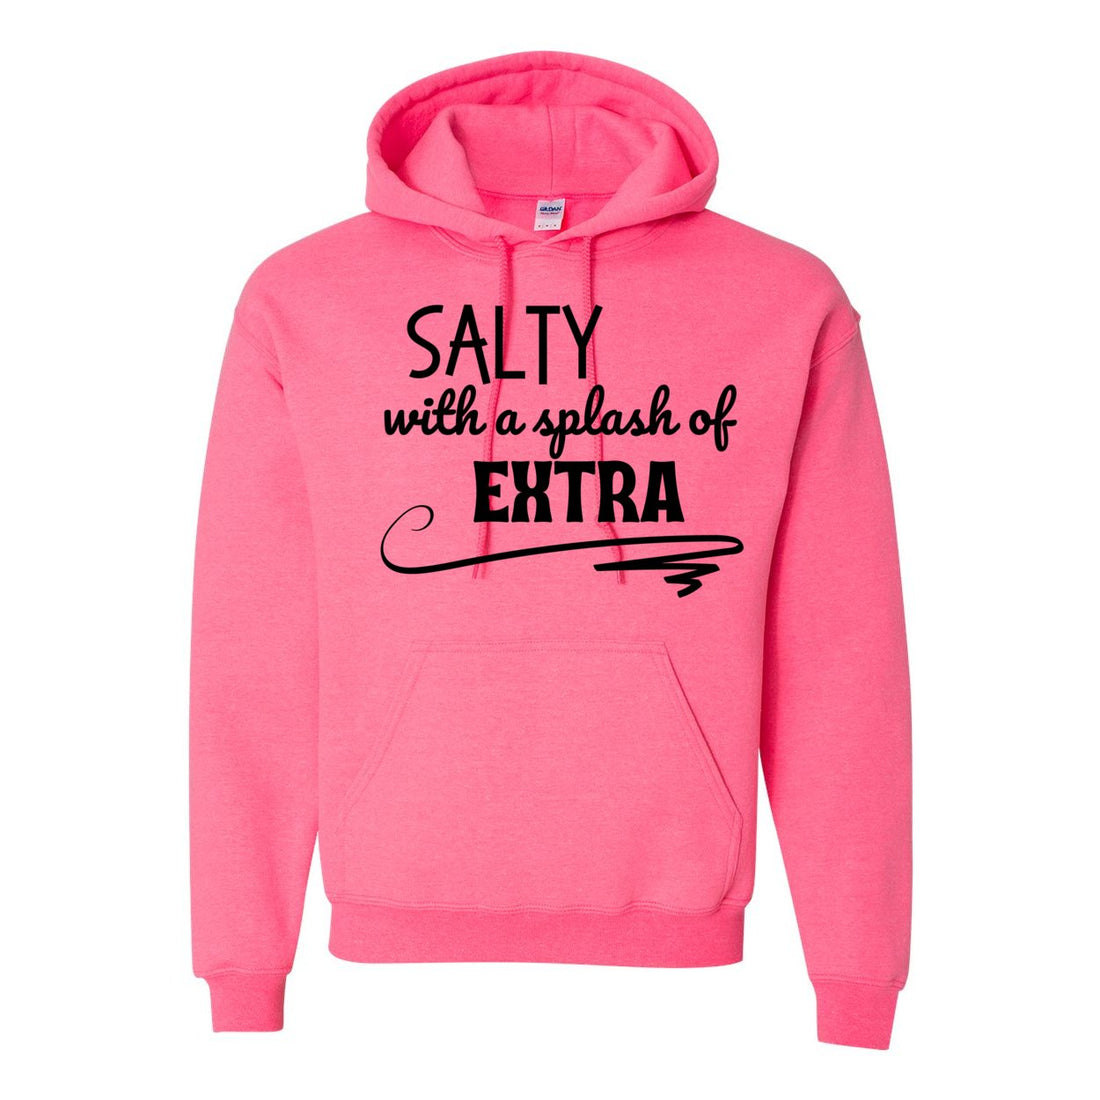 Salty With A Splash Of ExtraHooded Sweatshirt - Sweaters/Hoodies - Positively Sassy - Salty With A Splash Of ExtraHooded Sweatshirt